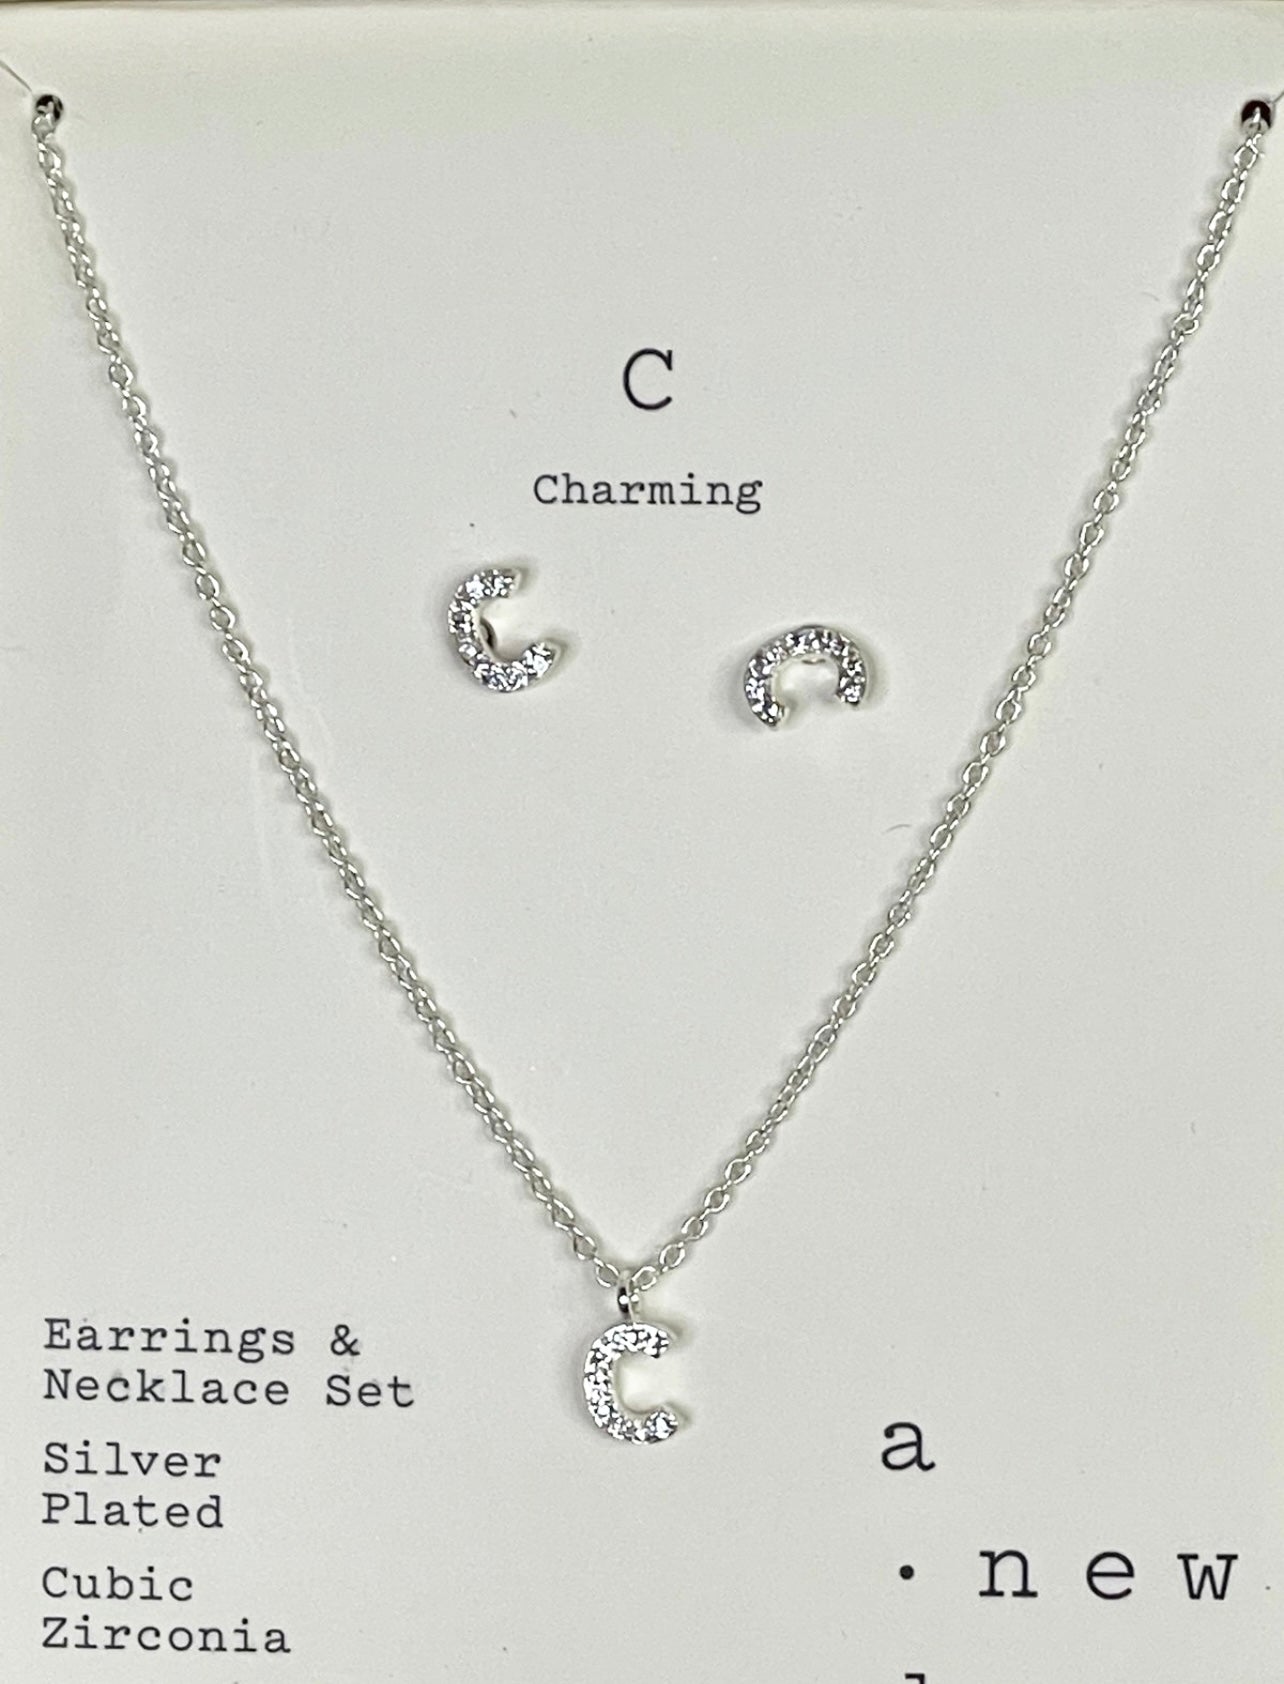 A New Day Charming Letter C Silver Plated Necklace and Earrings Set